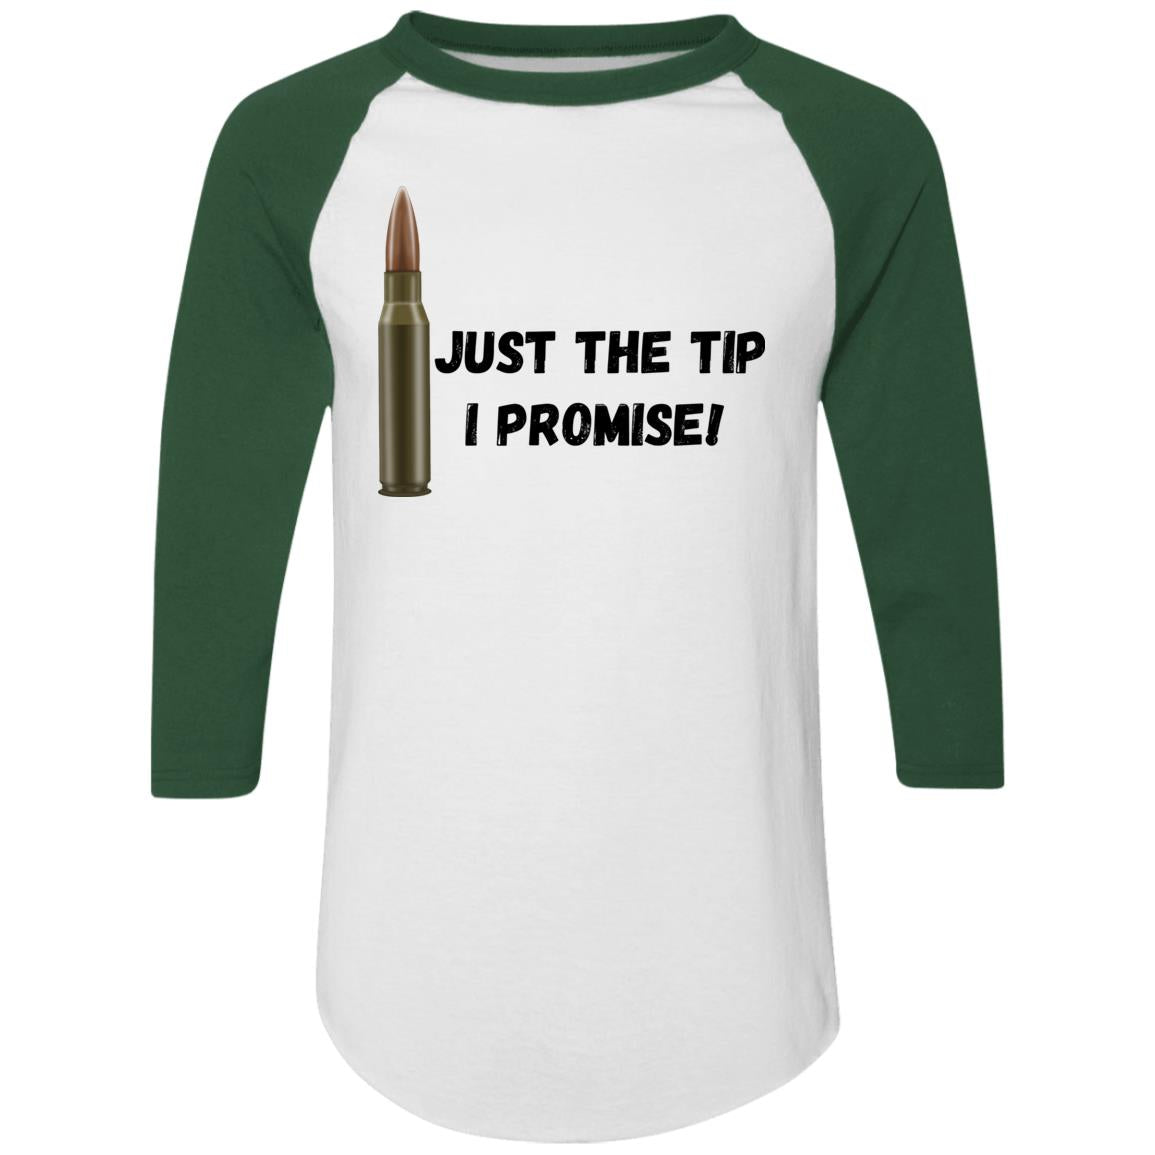 Just the tip, I Promise (Bullet / Hunting) -4420 Colorblock Raglan Jersey